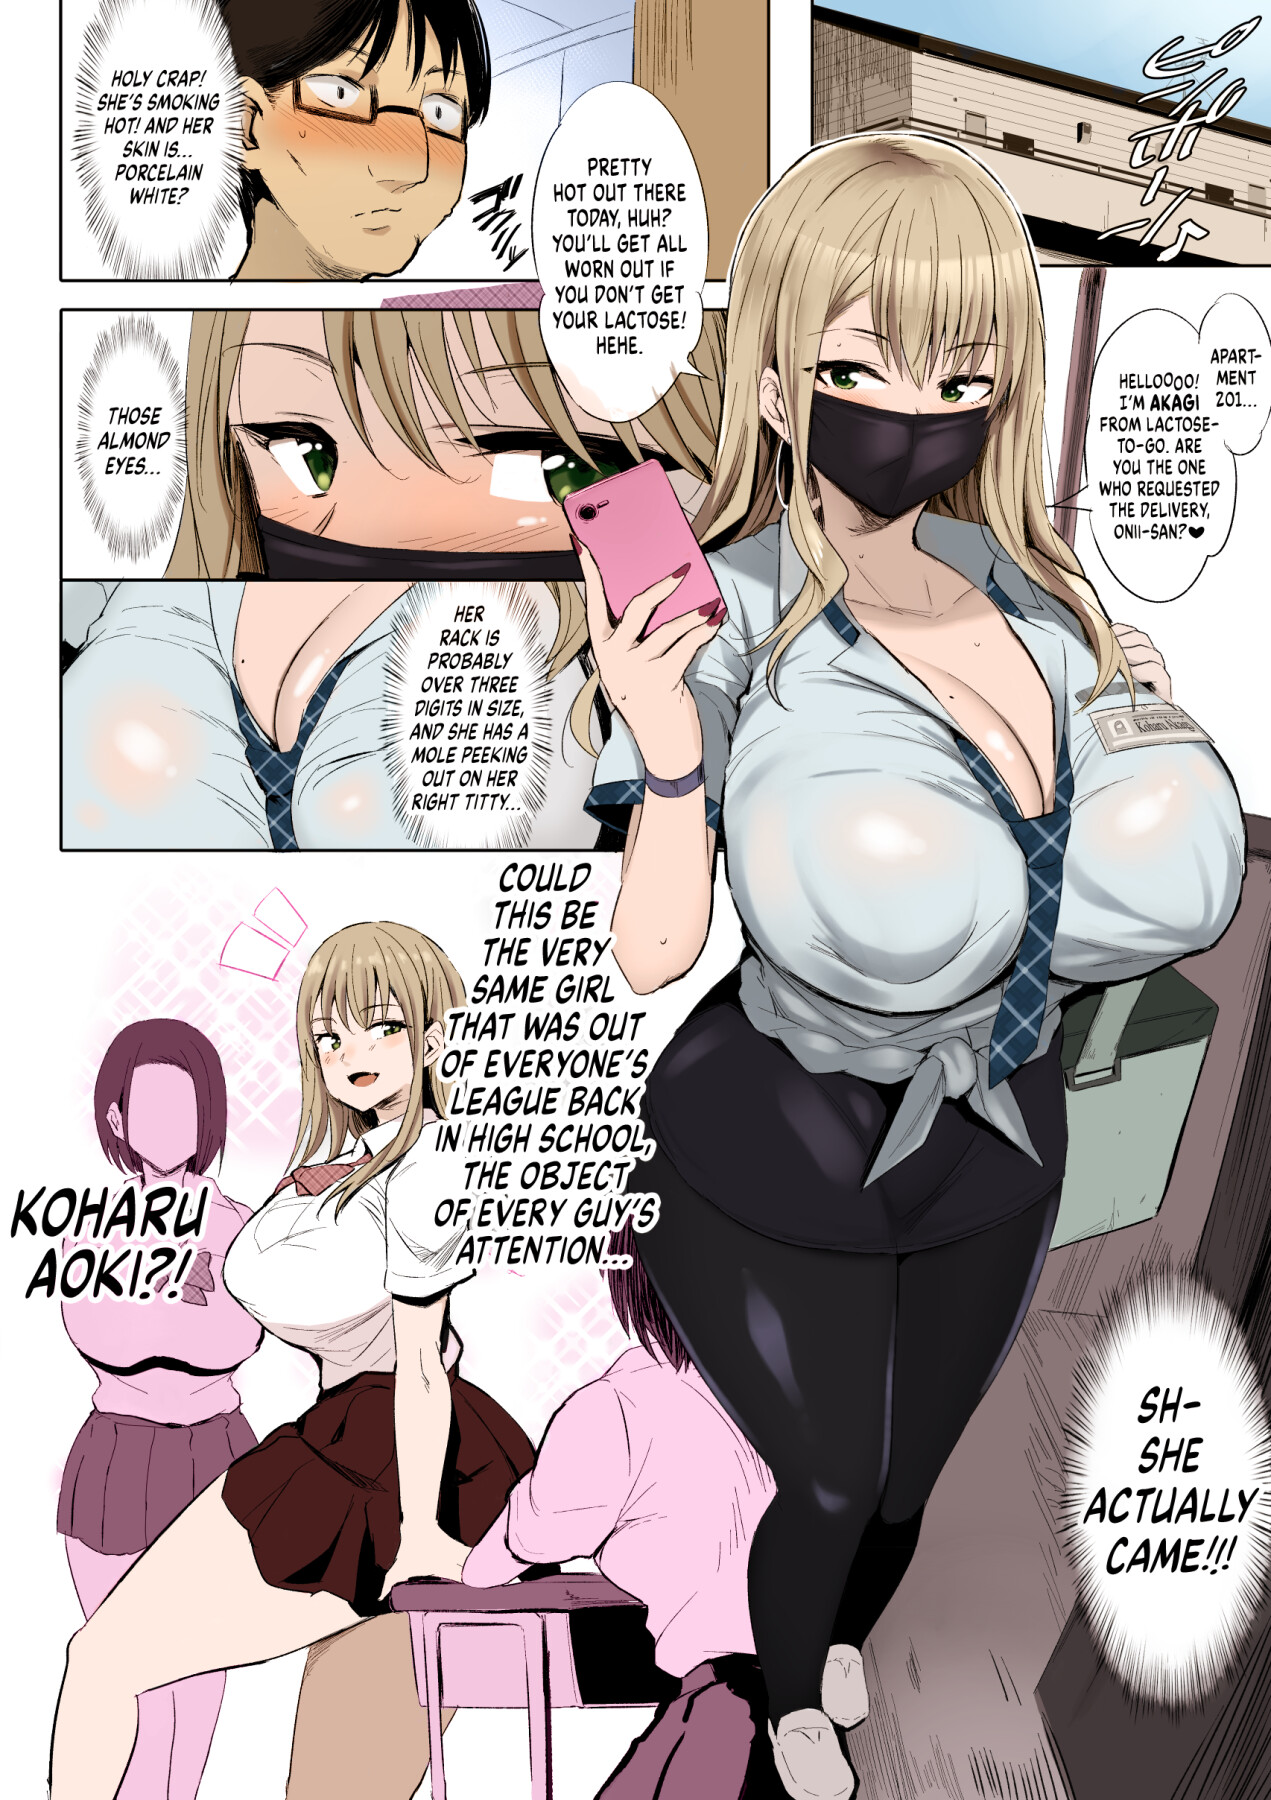 In Need of Tits? (Color) Doujins- Original Series